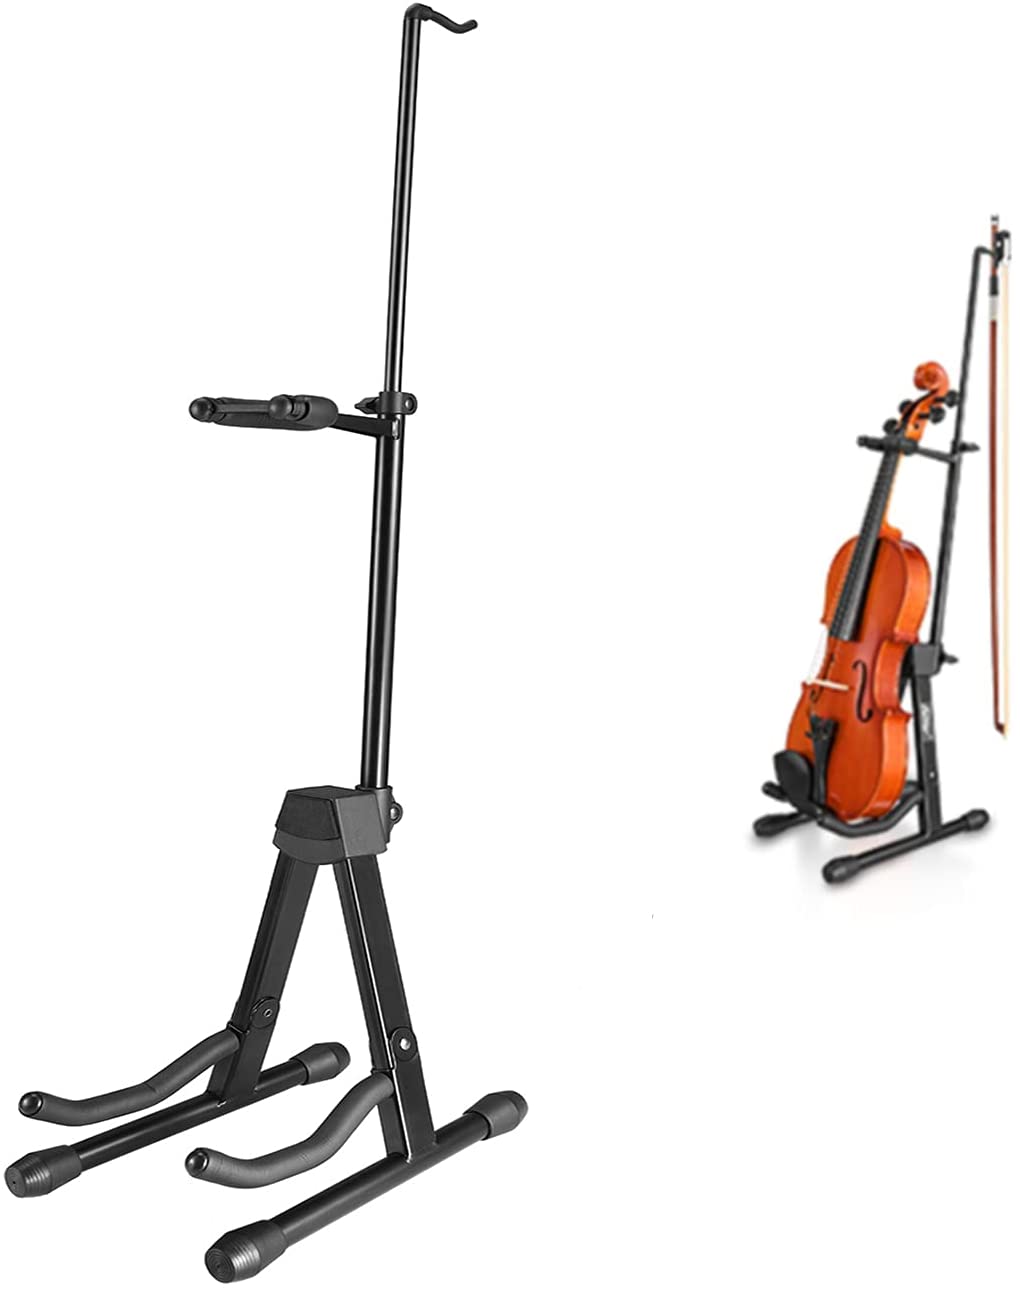 Eastar EST-006 Violin Stand with Retractable Bow Holder